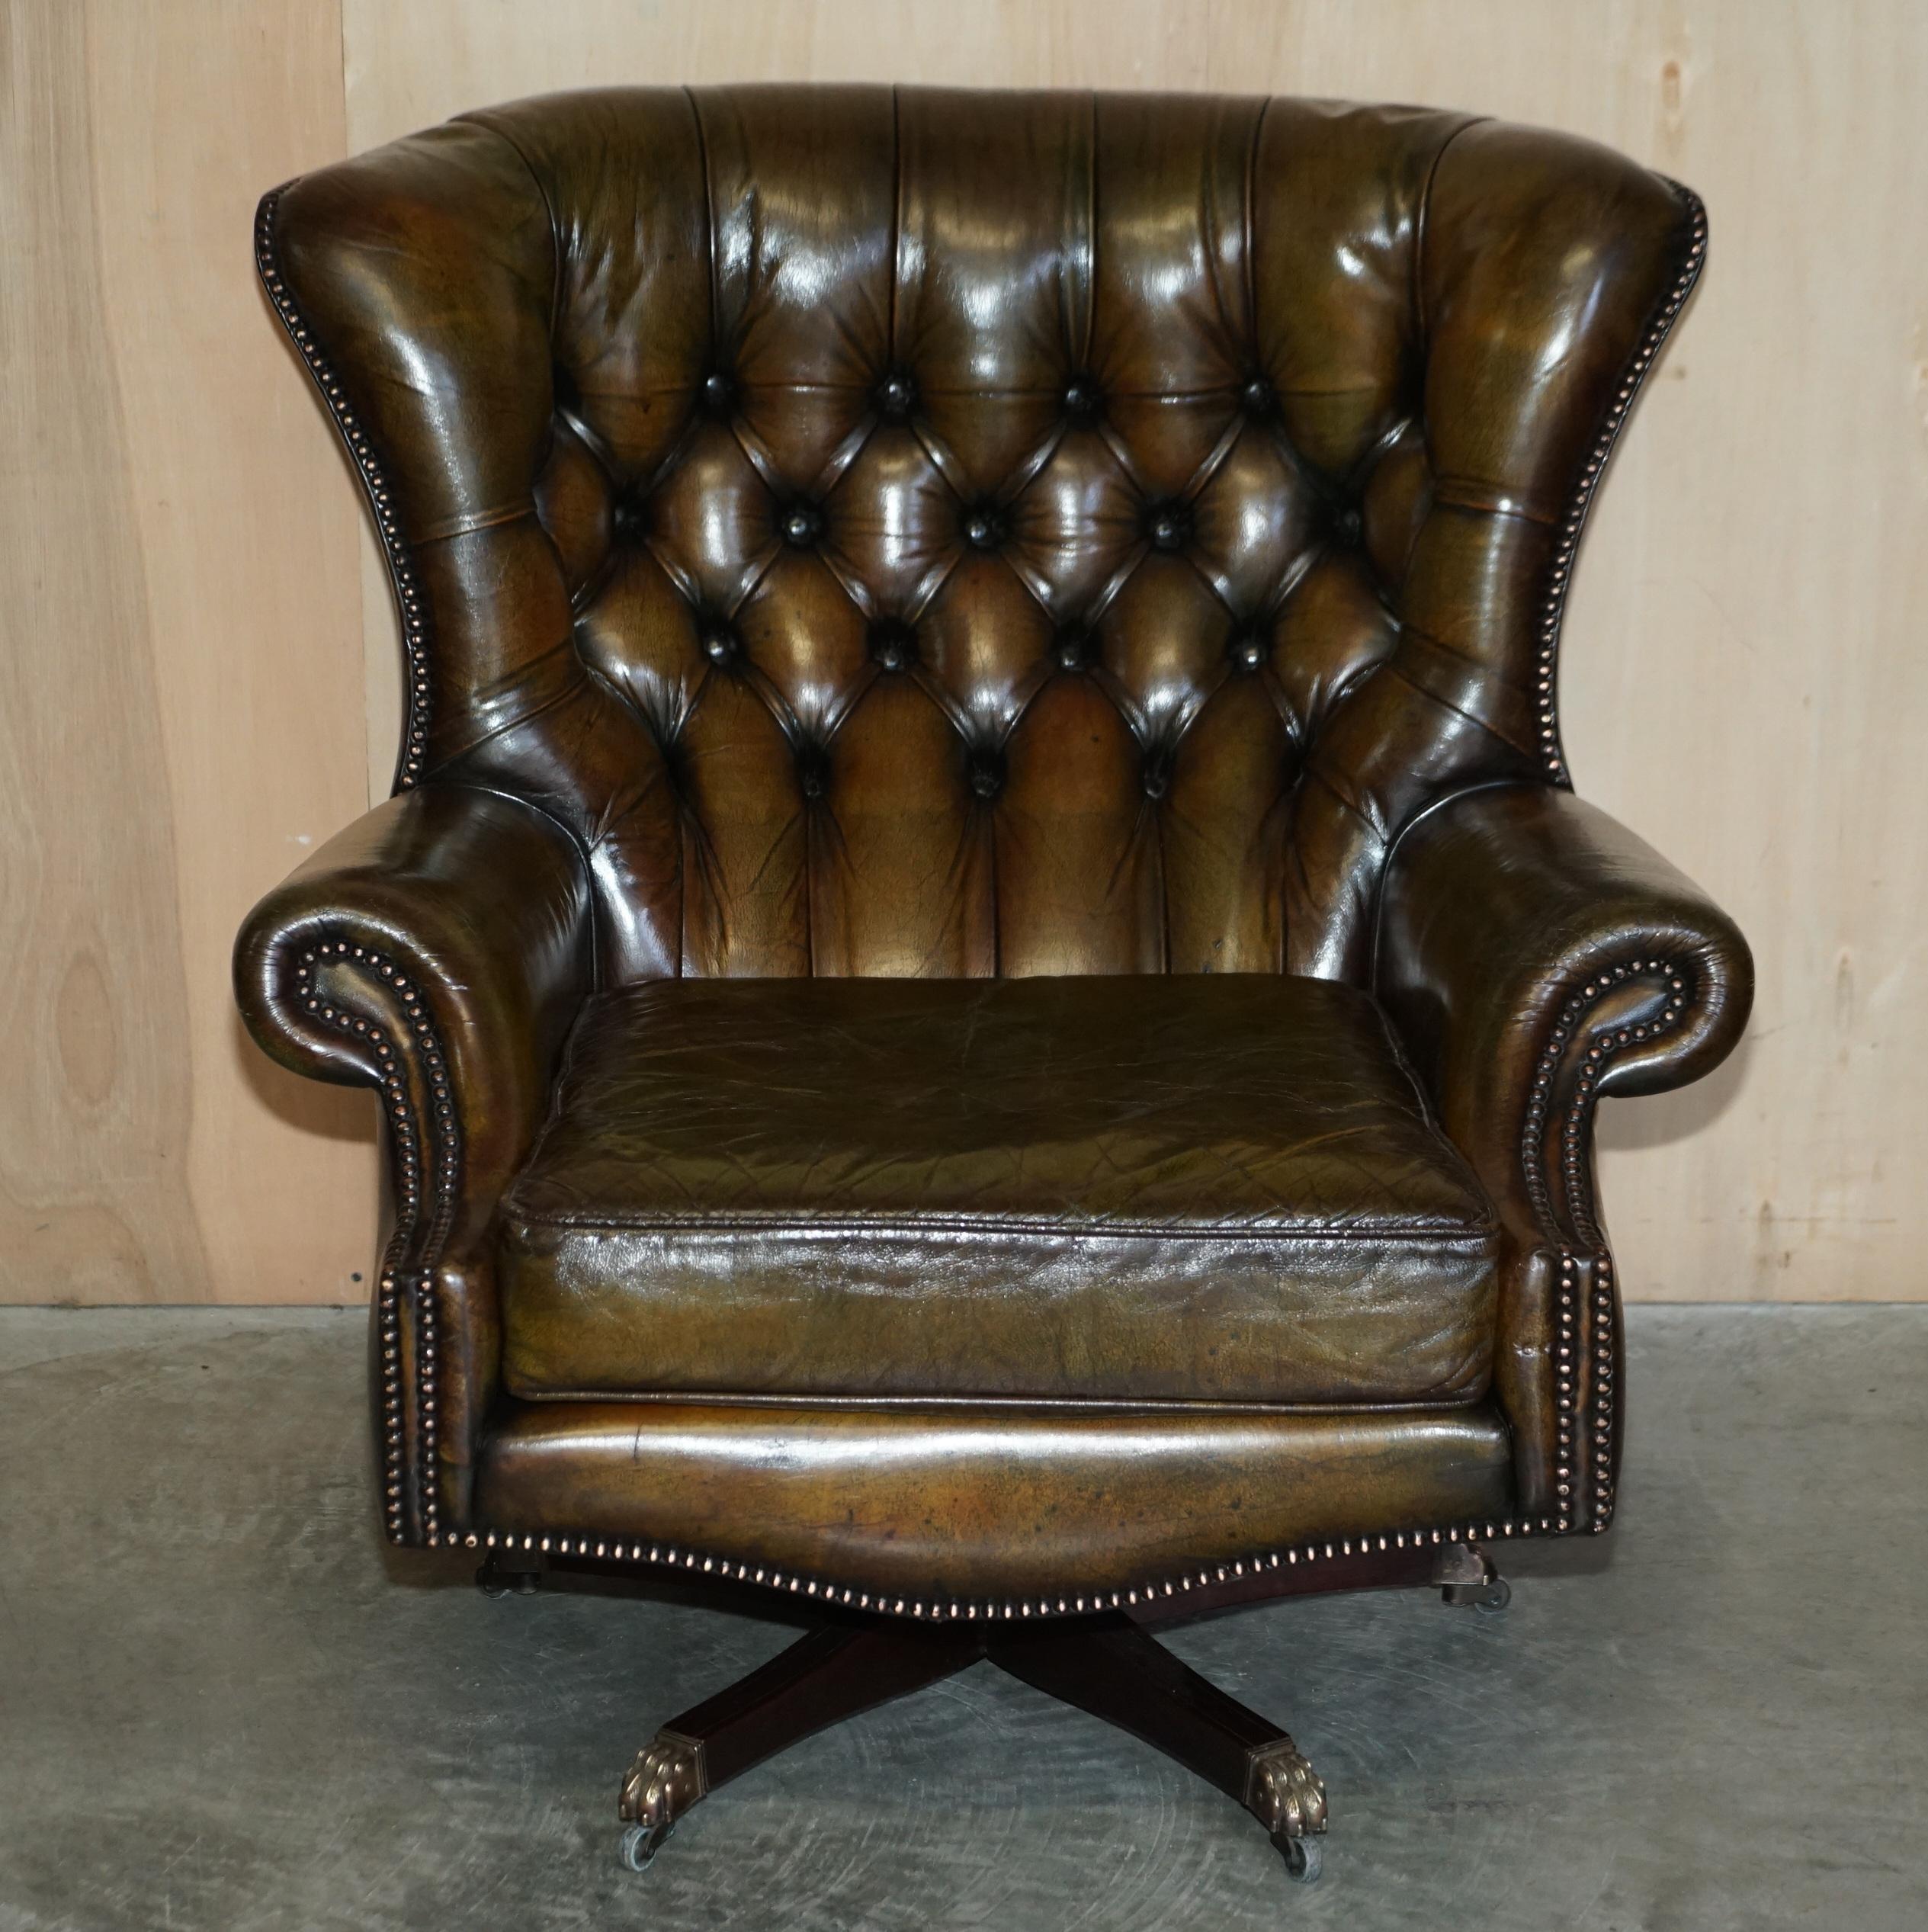 We are delighted to offer for sale this stunning original vintage Mid Century Modern Harrods London retailed hand dyed brown leather restored swivel armchair.

A super comfortable and stylish swivel armchair, this was made by Pegasus and retailed